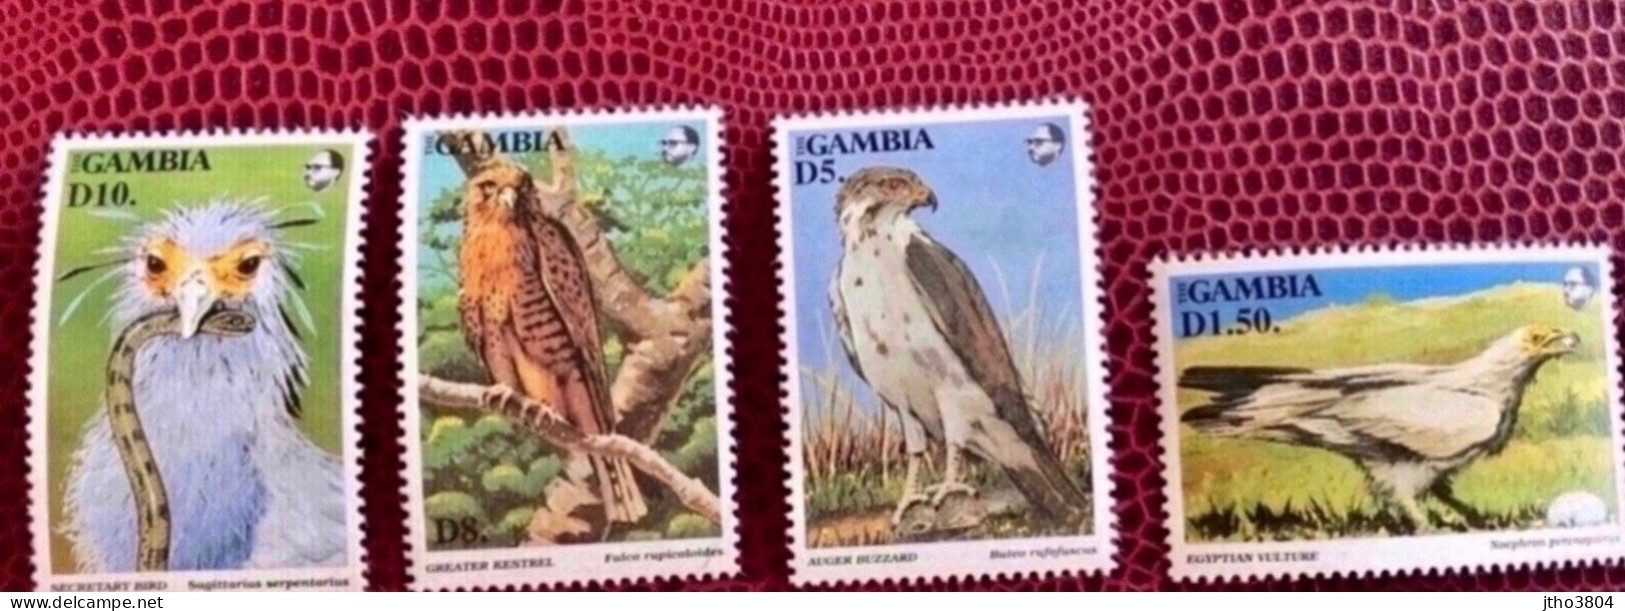 GAMBIE 1993 4 V Neuf MNH ** YT 1319 1320 1321 1322 Rapace Ucello Oiseau Bird Pájaro Vogel THE GAMBIA - Arends & Roofvogels